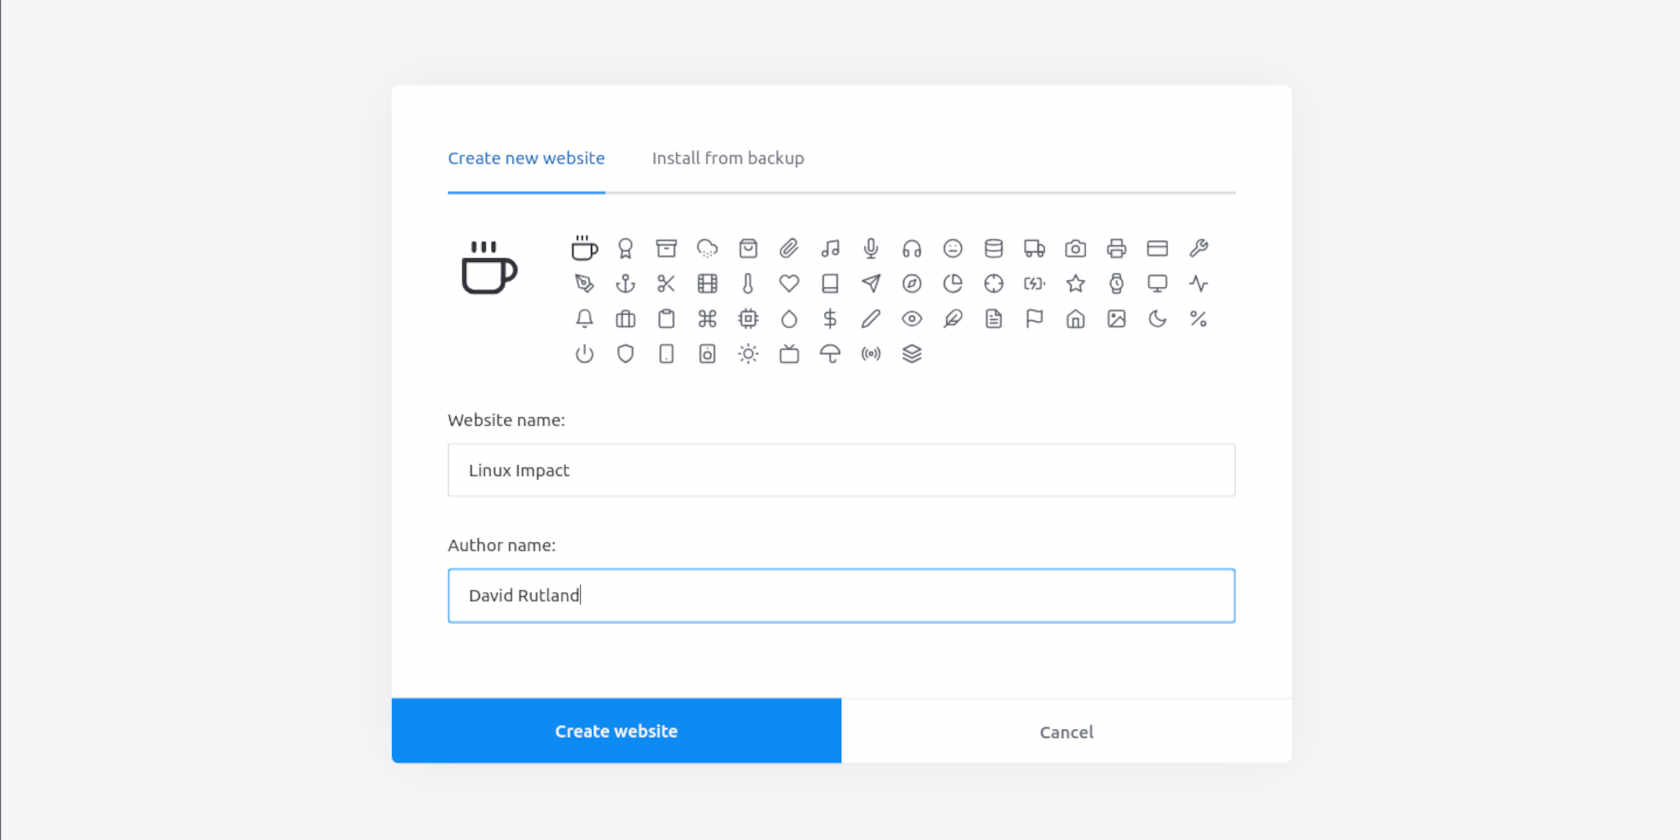 Create new site dialogue, showing icons, Site name and author name